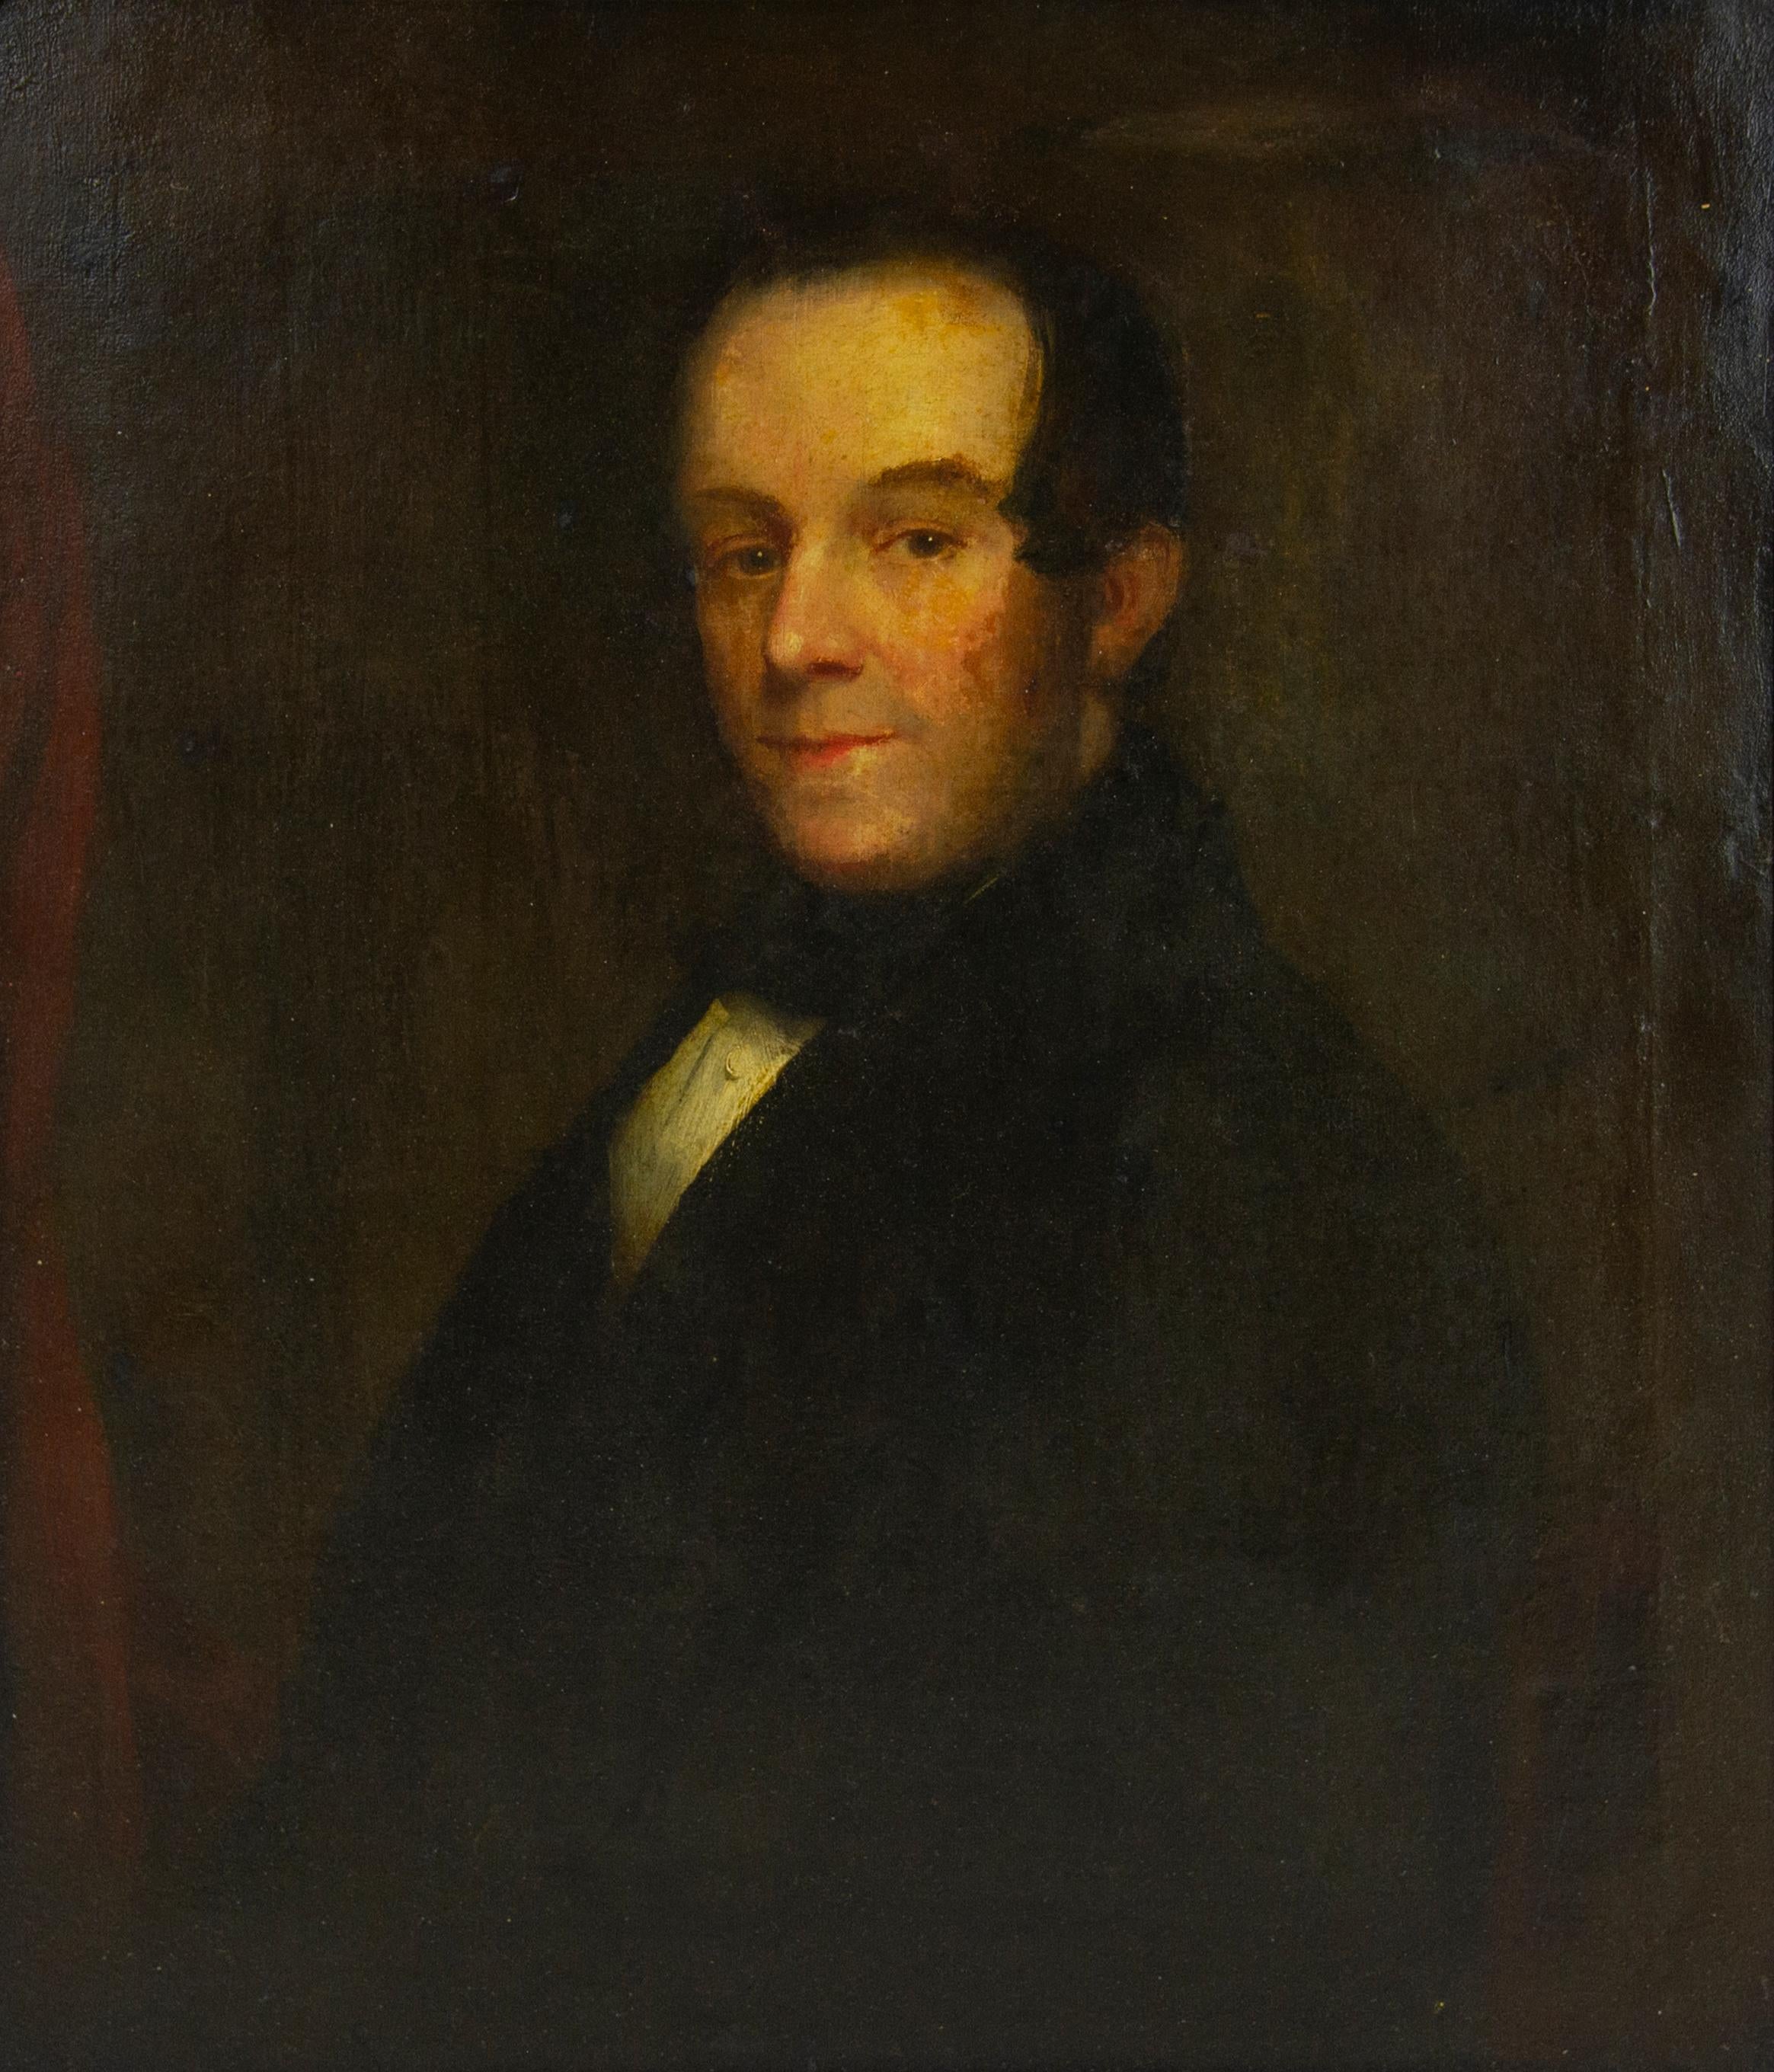 Antique oil painting, gentleman's portrait, oil portrait, Antique Furniture, England 1820, B638A.

England 1820
Well executed half length portrait
Oil on canvas, unsigned
Provenance from Hy's Restaurant in Ottawa, Canada.

Oil canvas 28.5